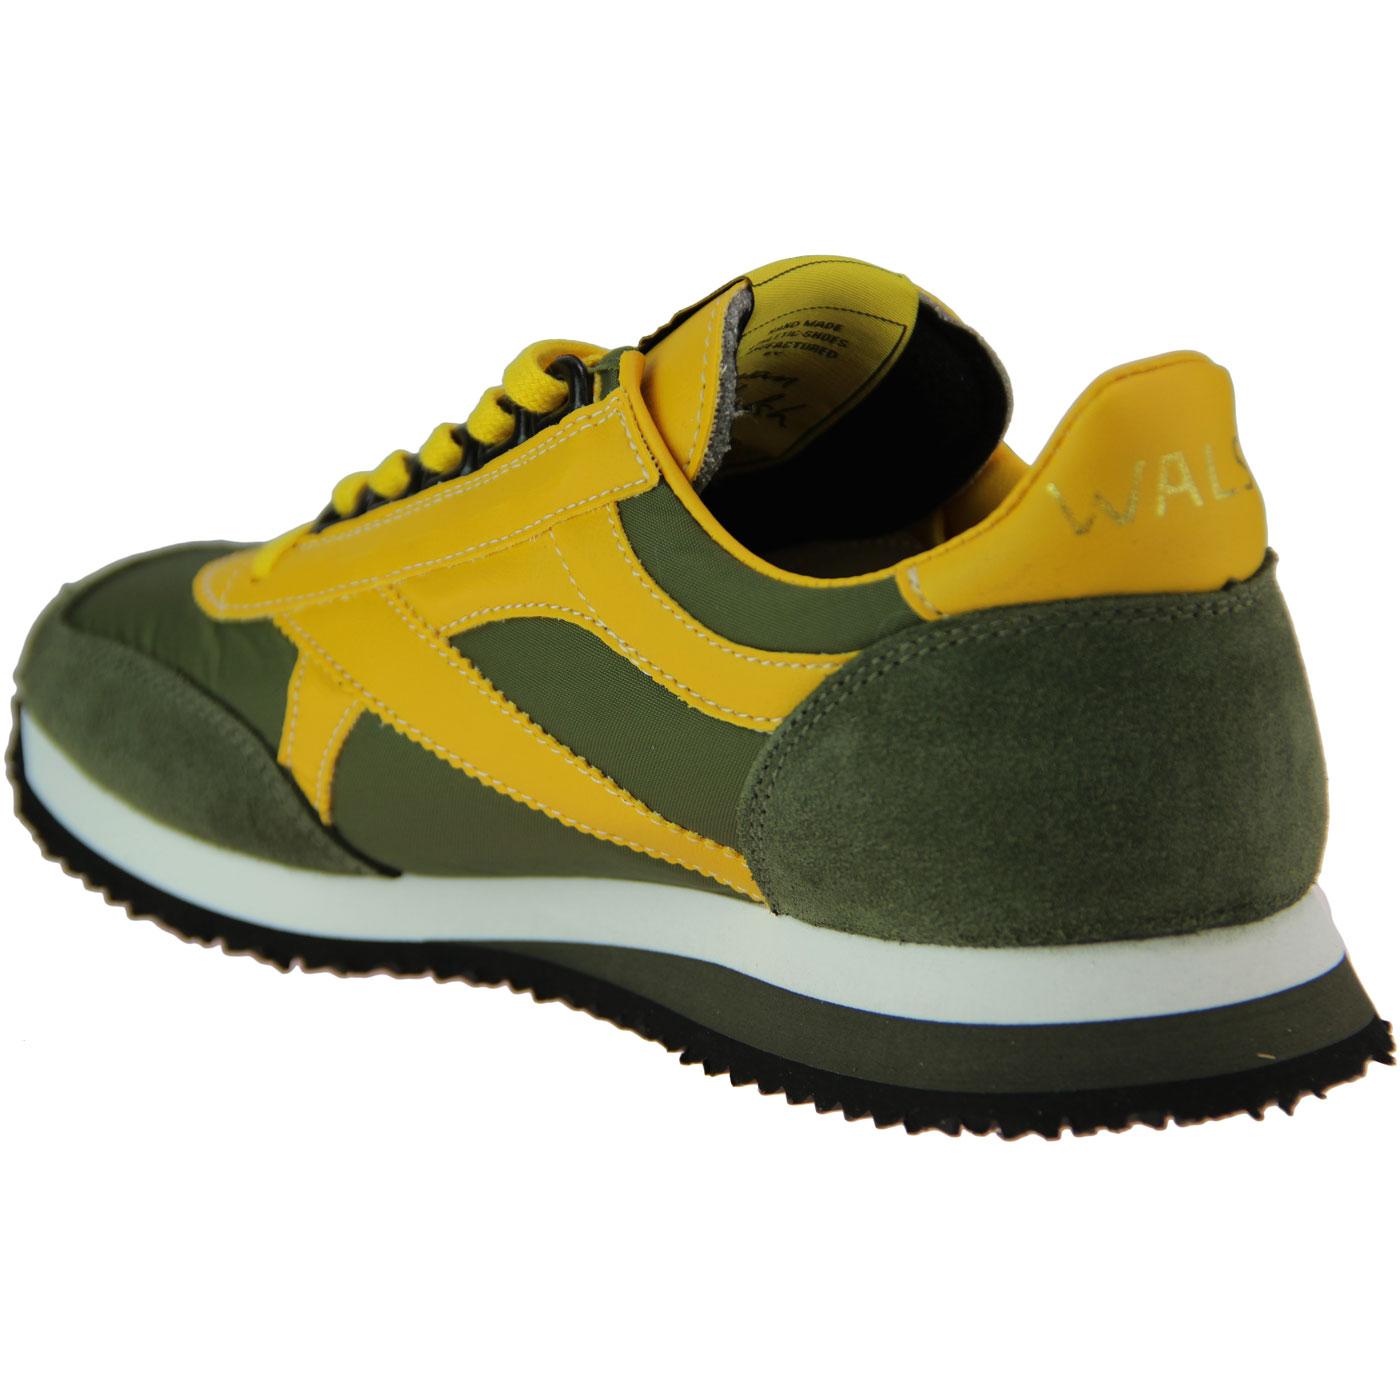 WALSH Voyager Made in England Retro Trainers Olive/Yellow